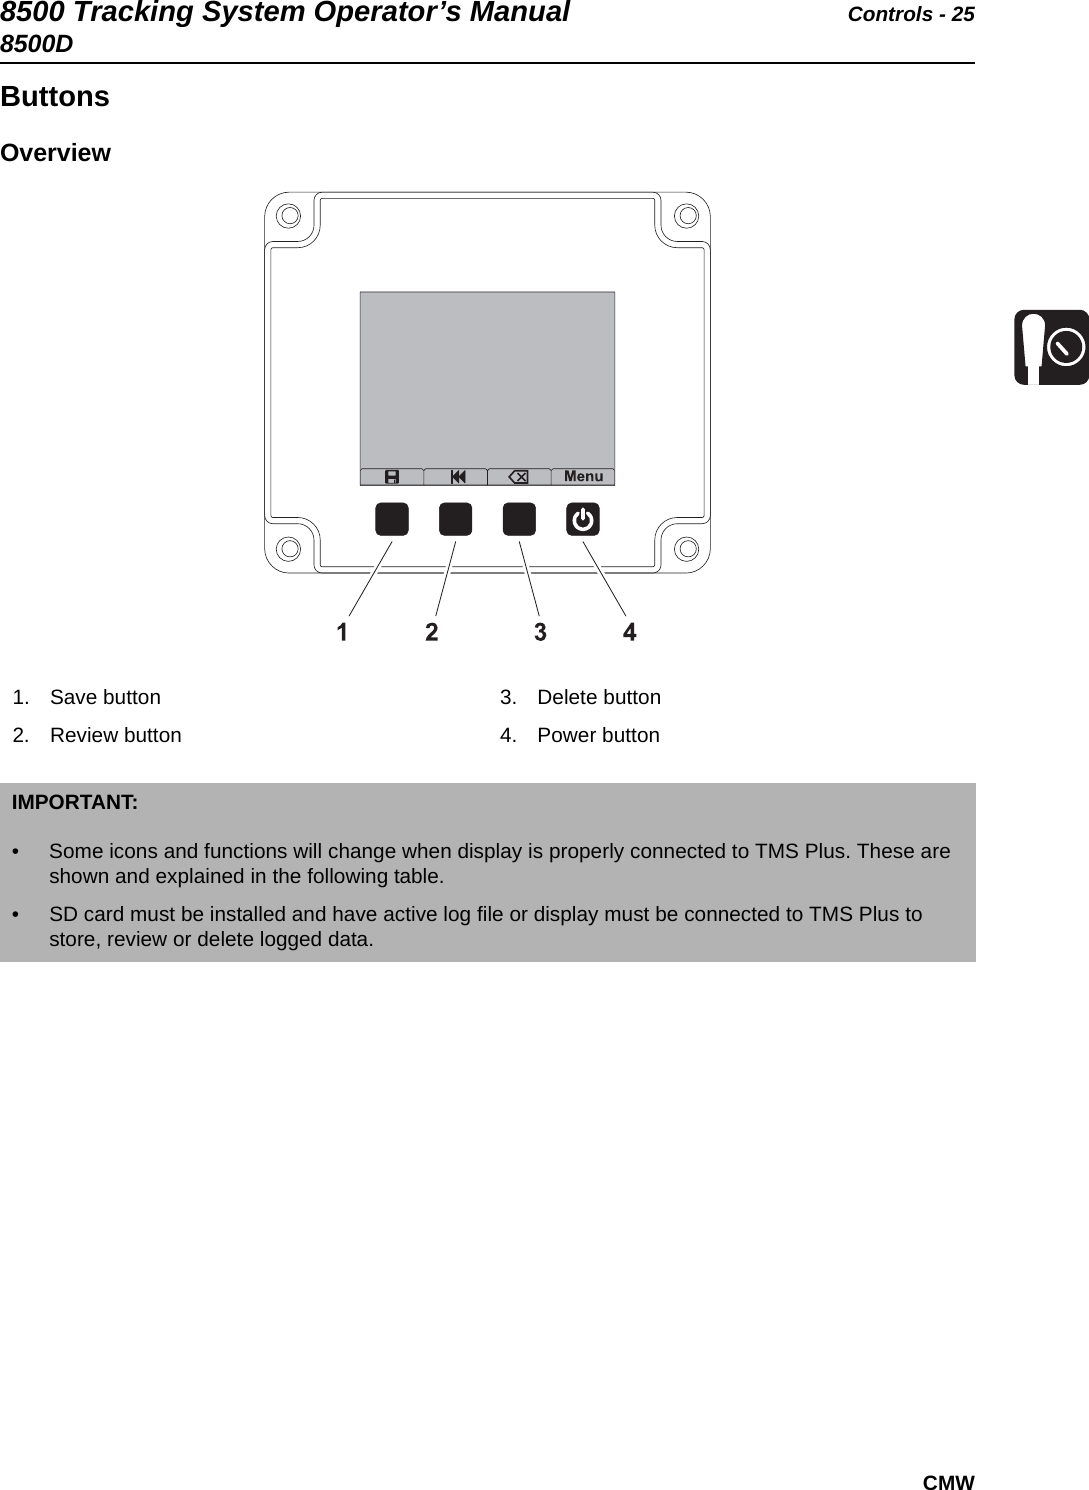 8500 Tracking System Operator’s Manual Controls - 258500DCMWButtonsOverview 1. Save button2. Review button3. Delete button4. Power buttonIMPORTANT: • Some icons and functions will change when display is properly connected to TMS Plus. These are shown and explained in the following table.• SD card must be installed and have active log file or display must be connected to TMS Plus to store, review or delete logged data.